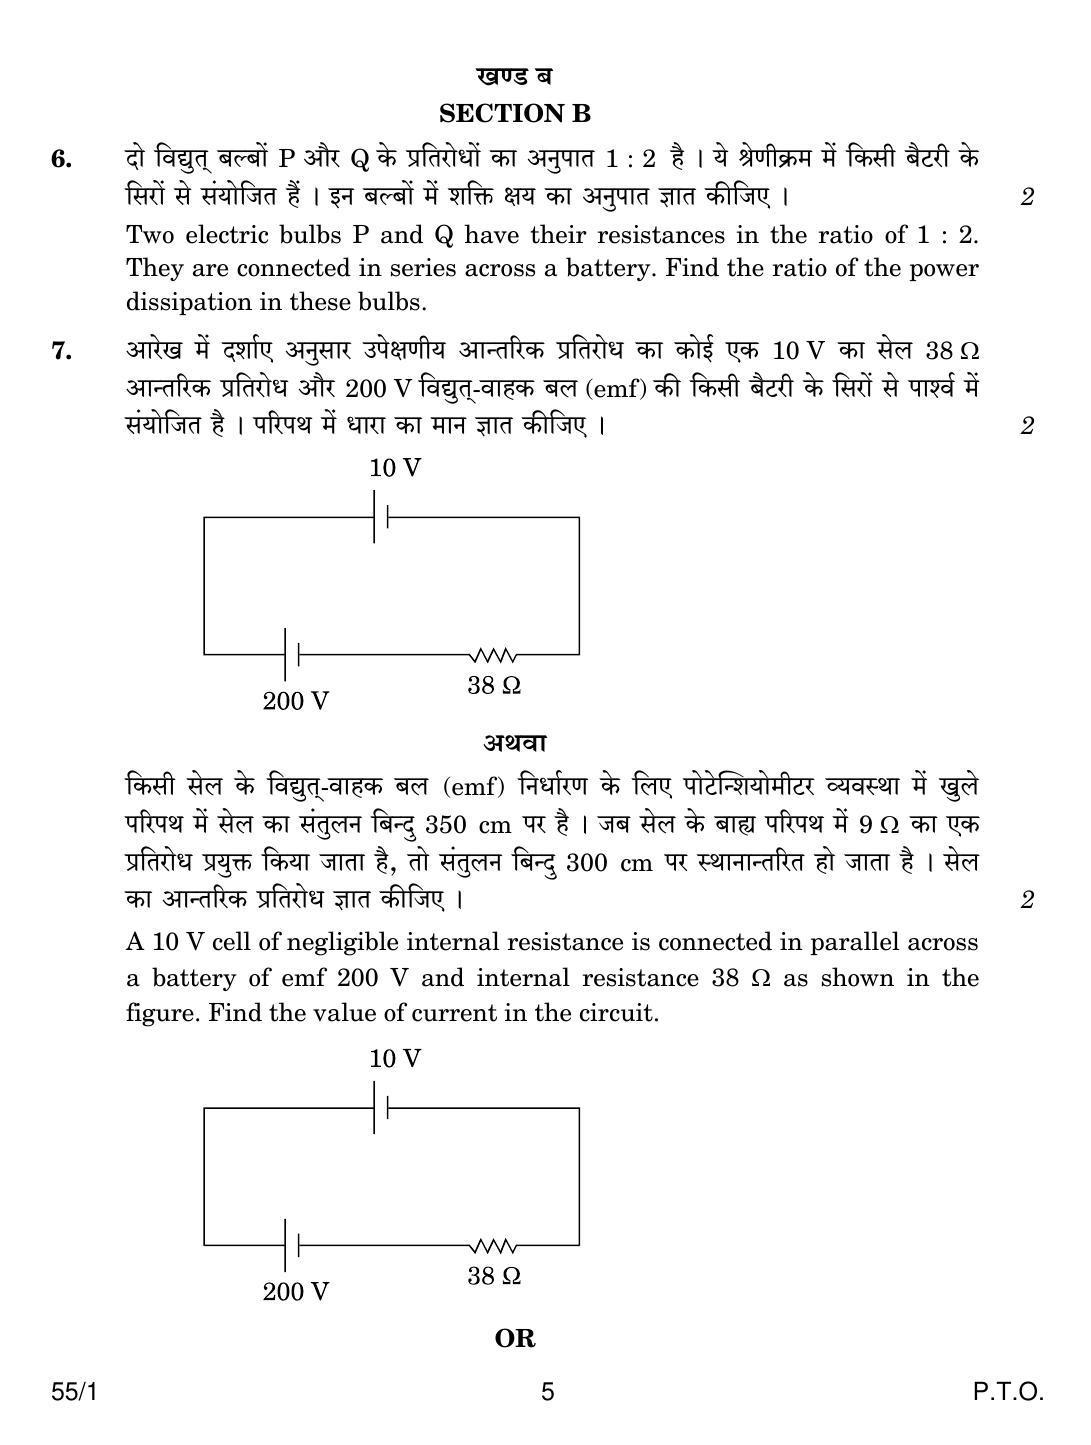 CBSE Class 12 55-1 PHYSICS 2018 Question Paper - Page 5